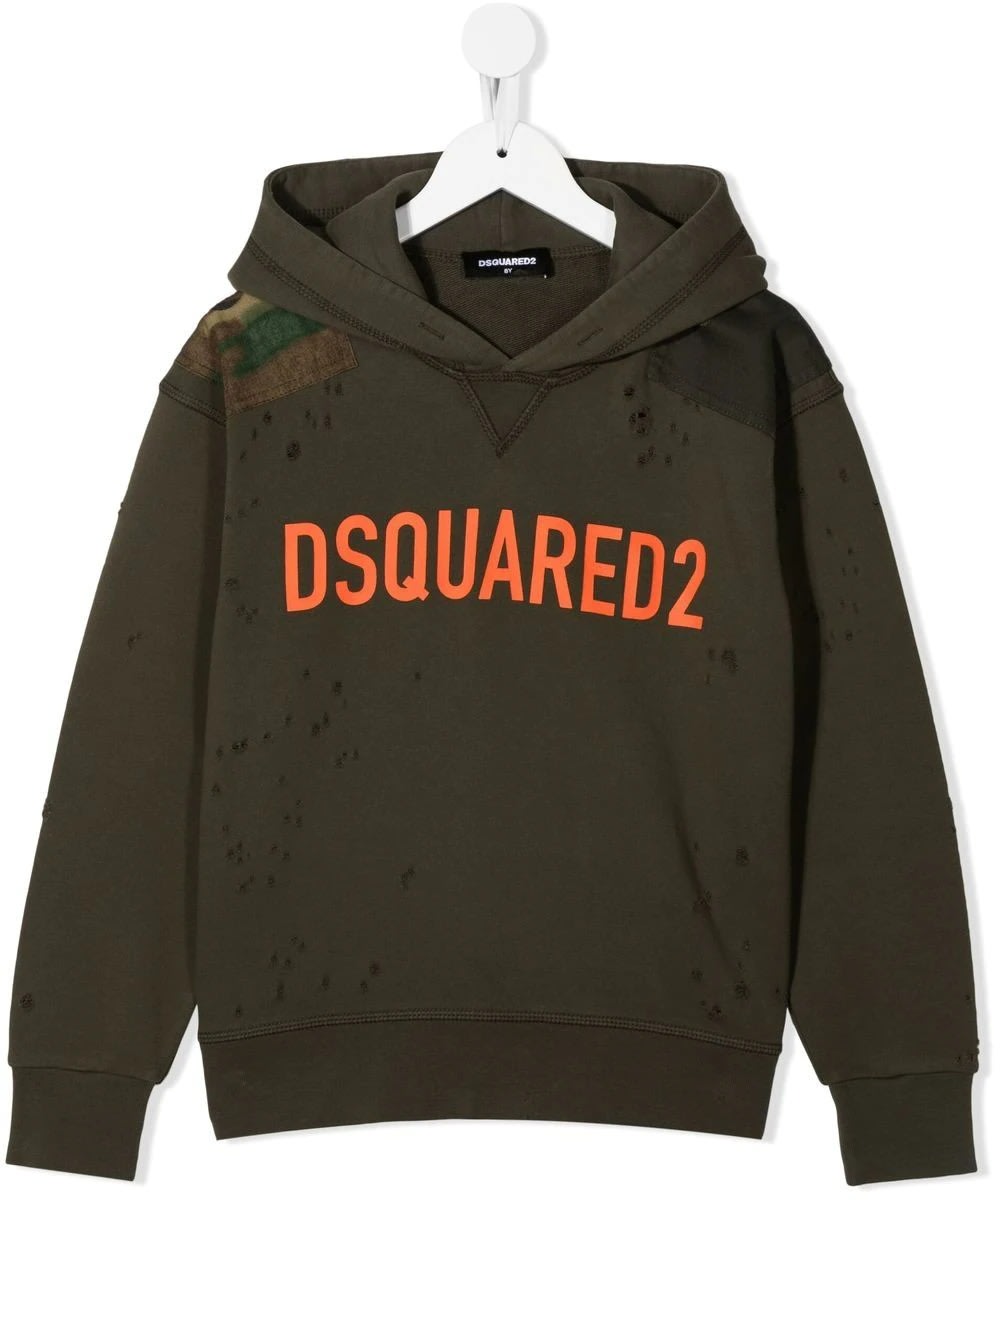 DSQUARED2 KIDS MILITARY GREEN HOODIE WITH RUINED EFFECT AND CONTRAST LOGO